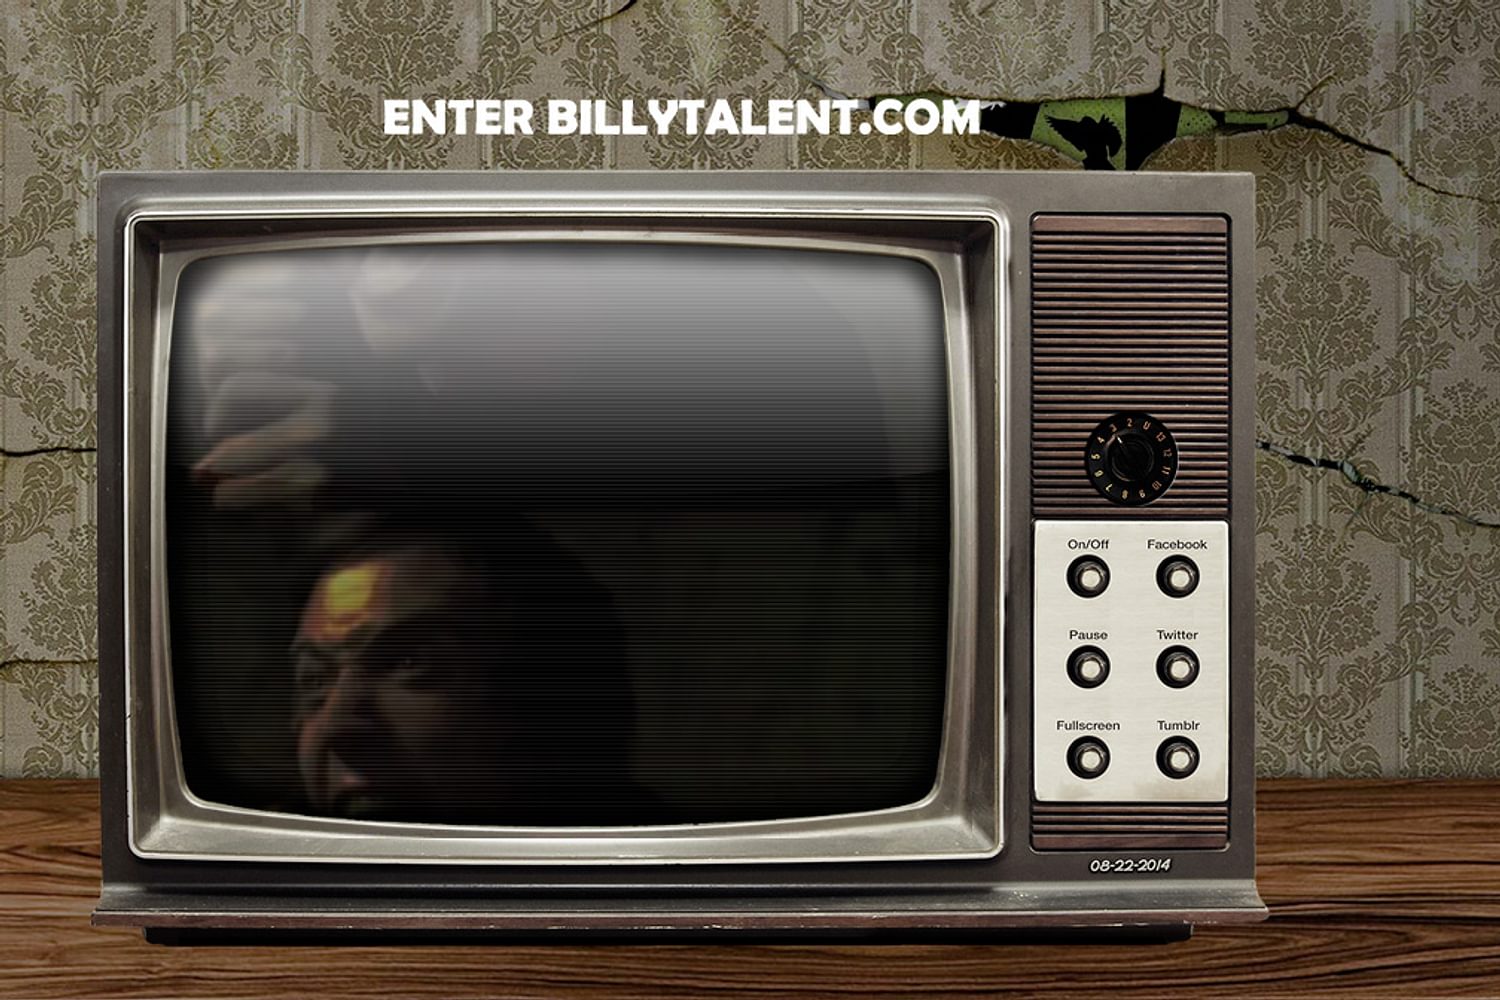 Billy Talent tease fans with cryptic website update